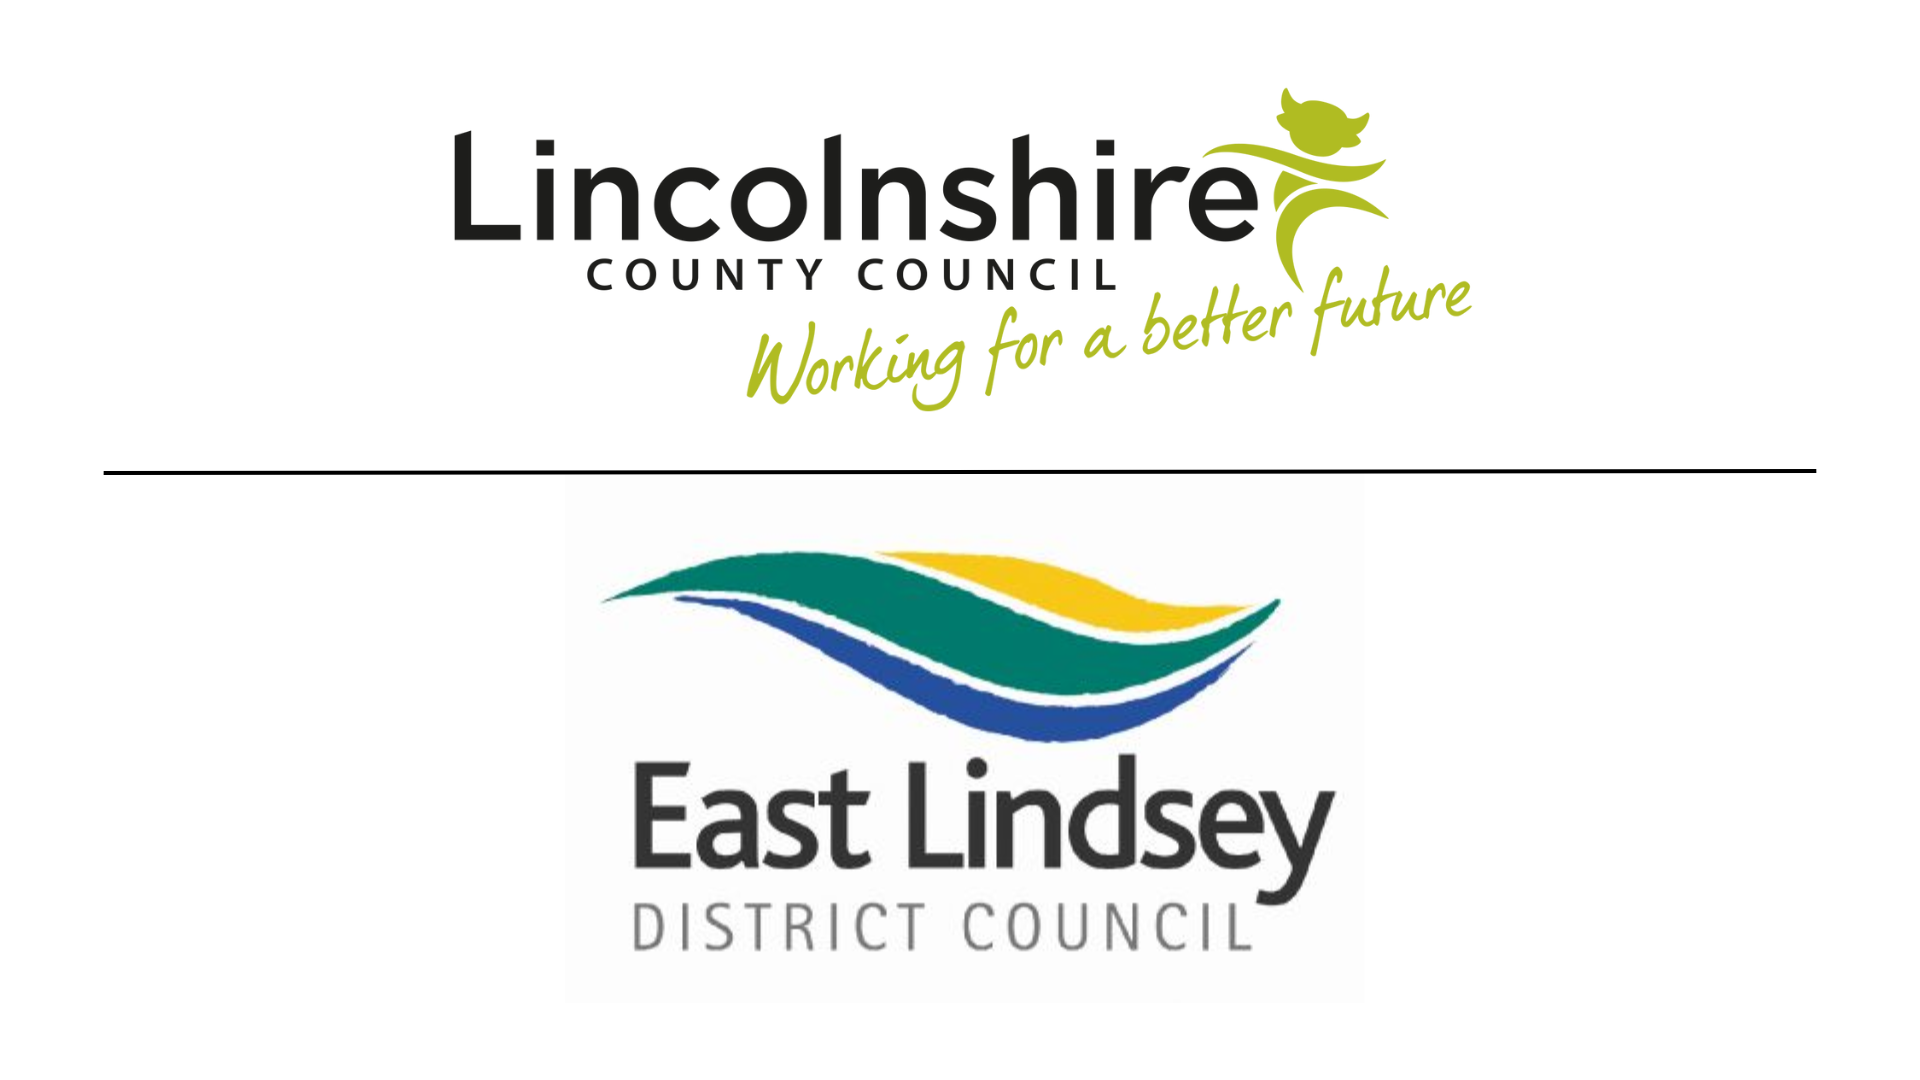 The logos for Lincolnshire County Council and East Lindsey District Council